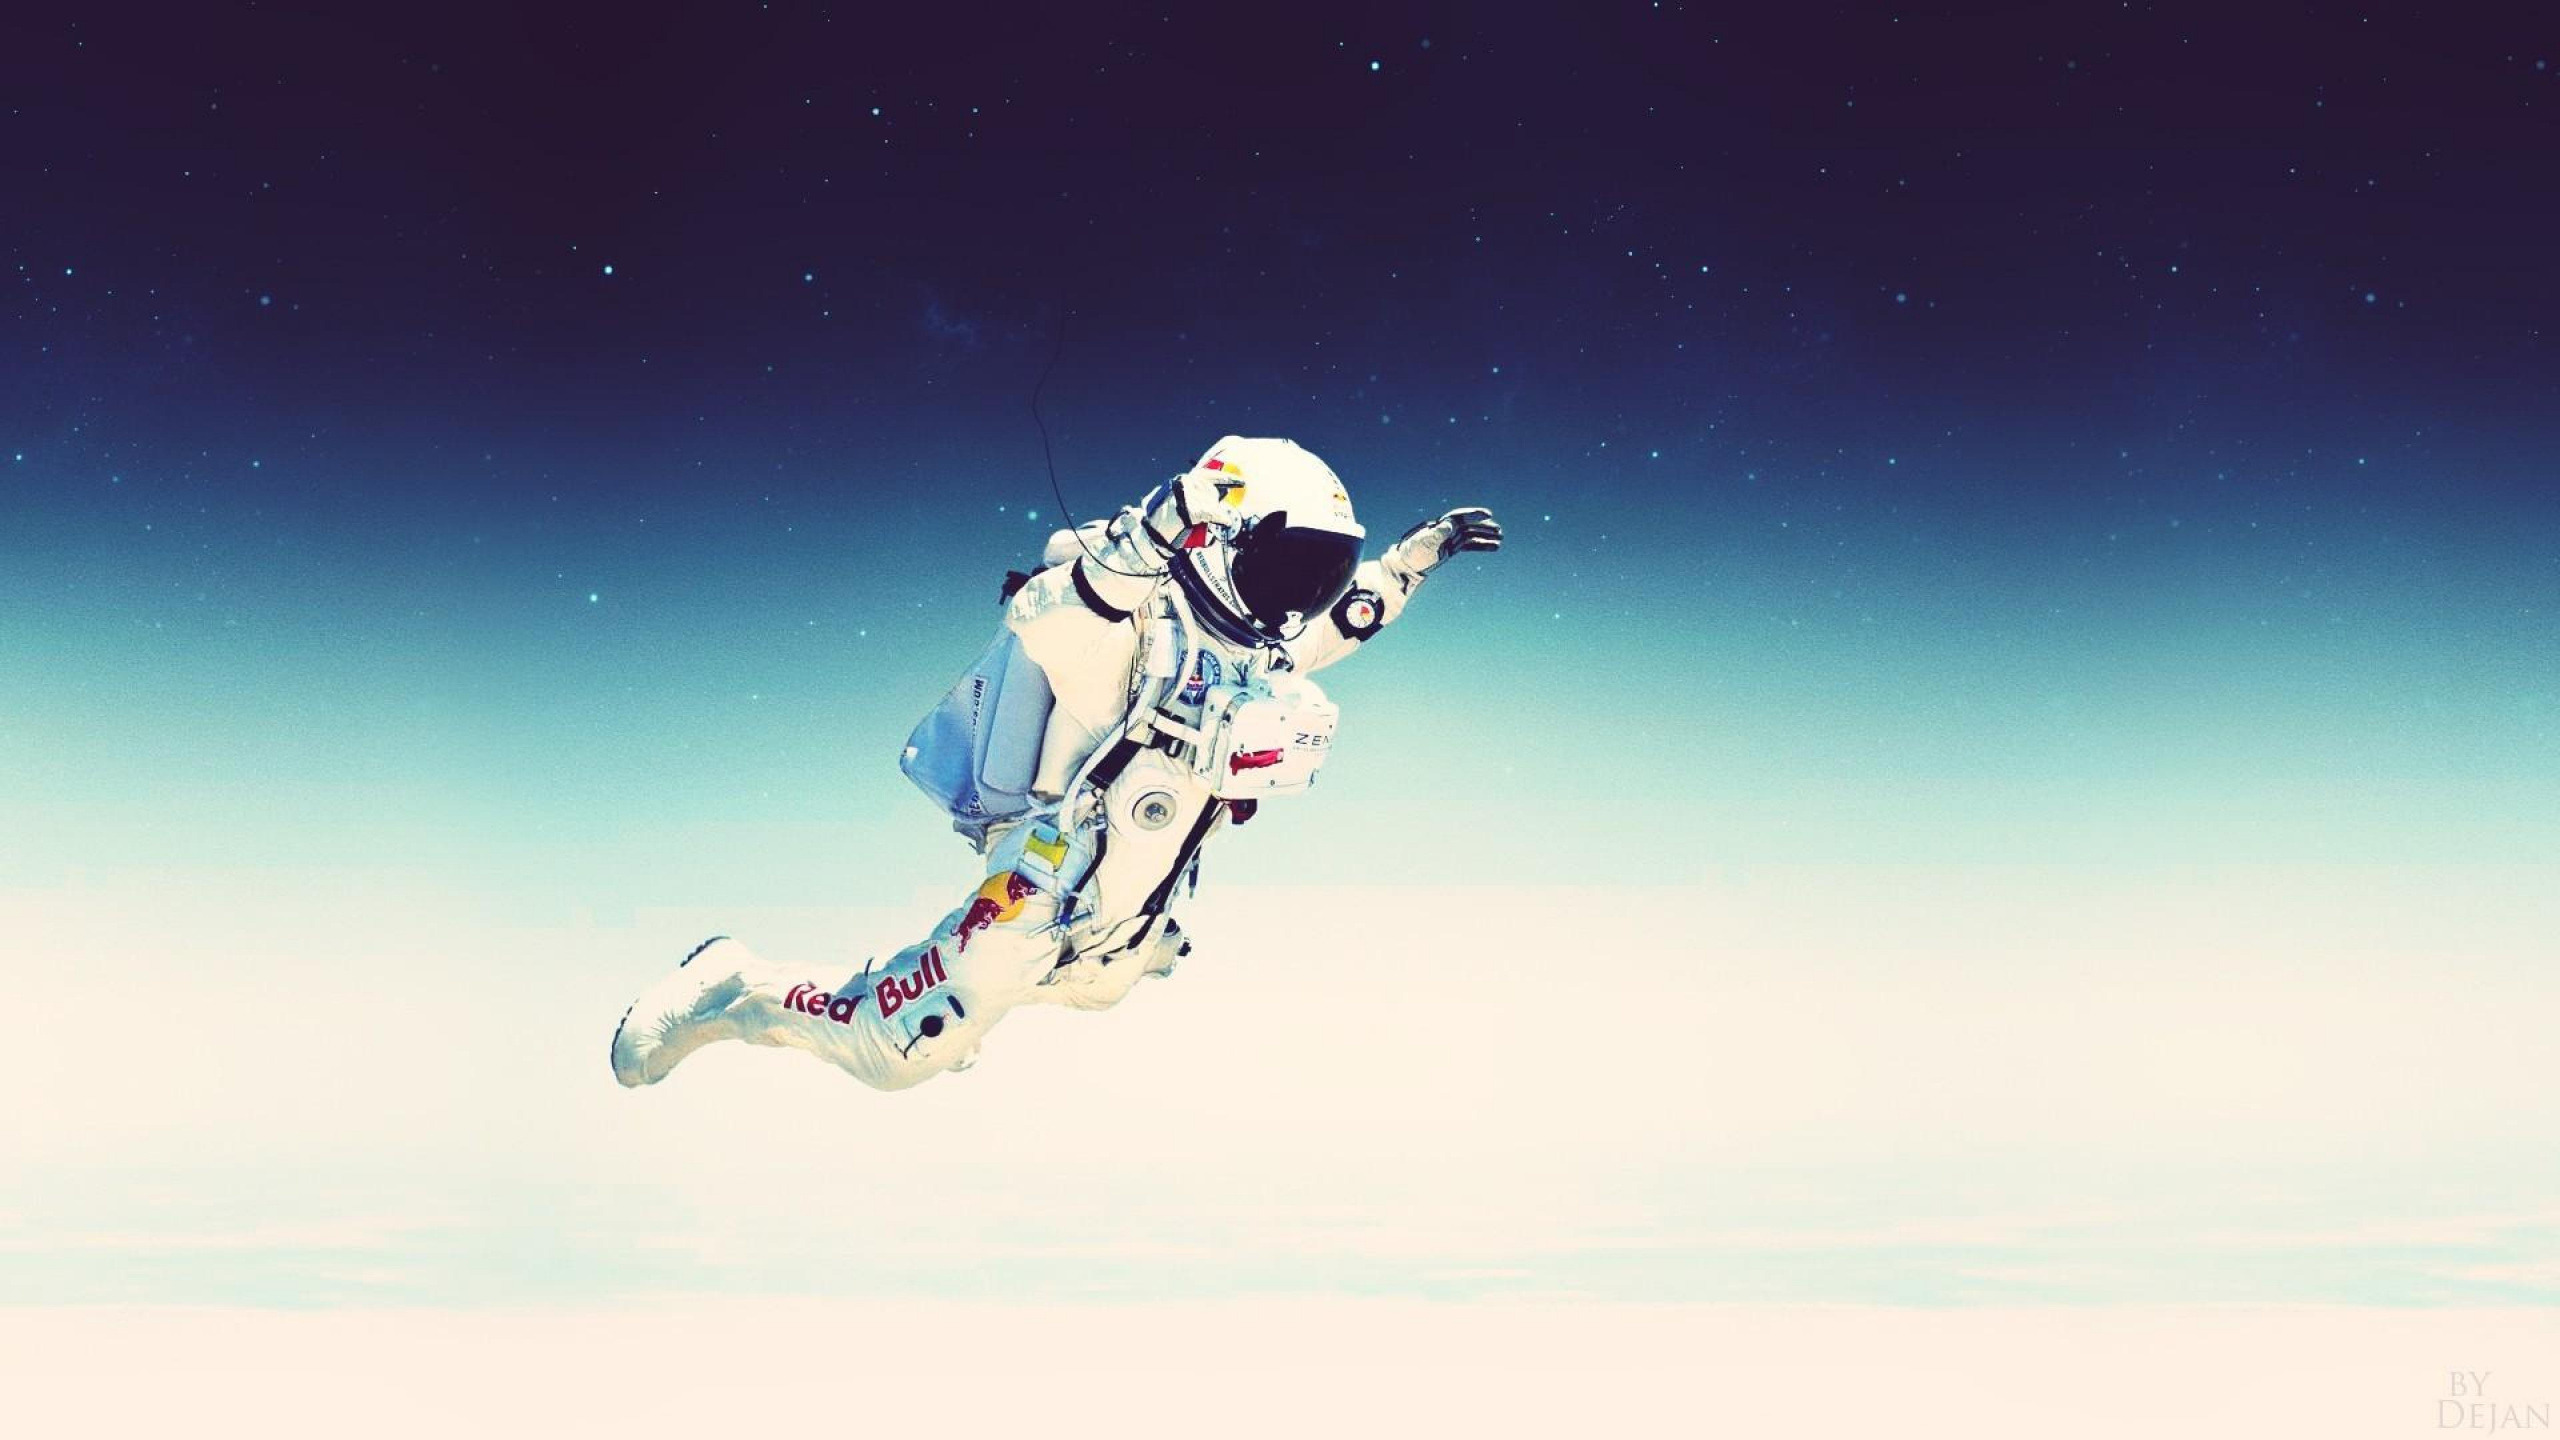 Man in White and Blue Suit Doing Sky Diving. Wallpaper in 2560x1440 Resolution